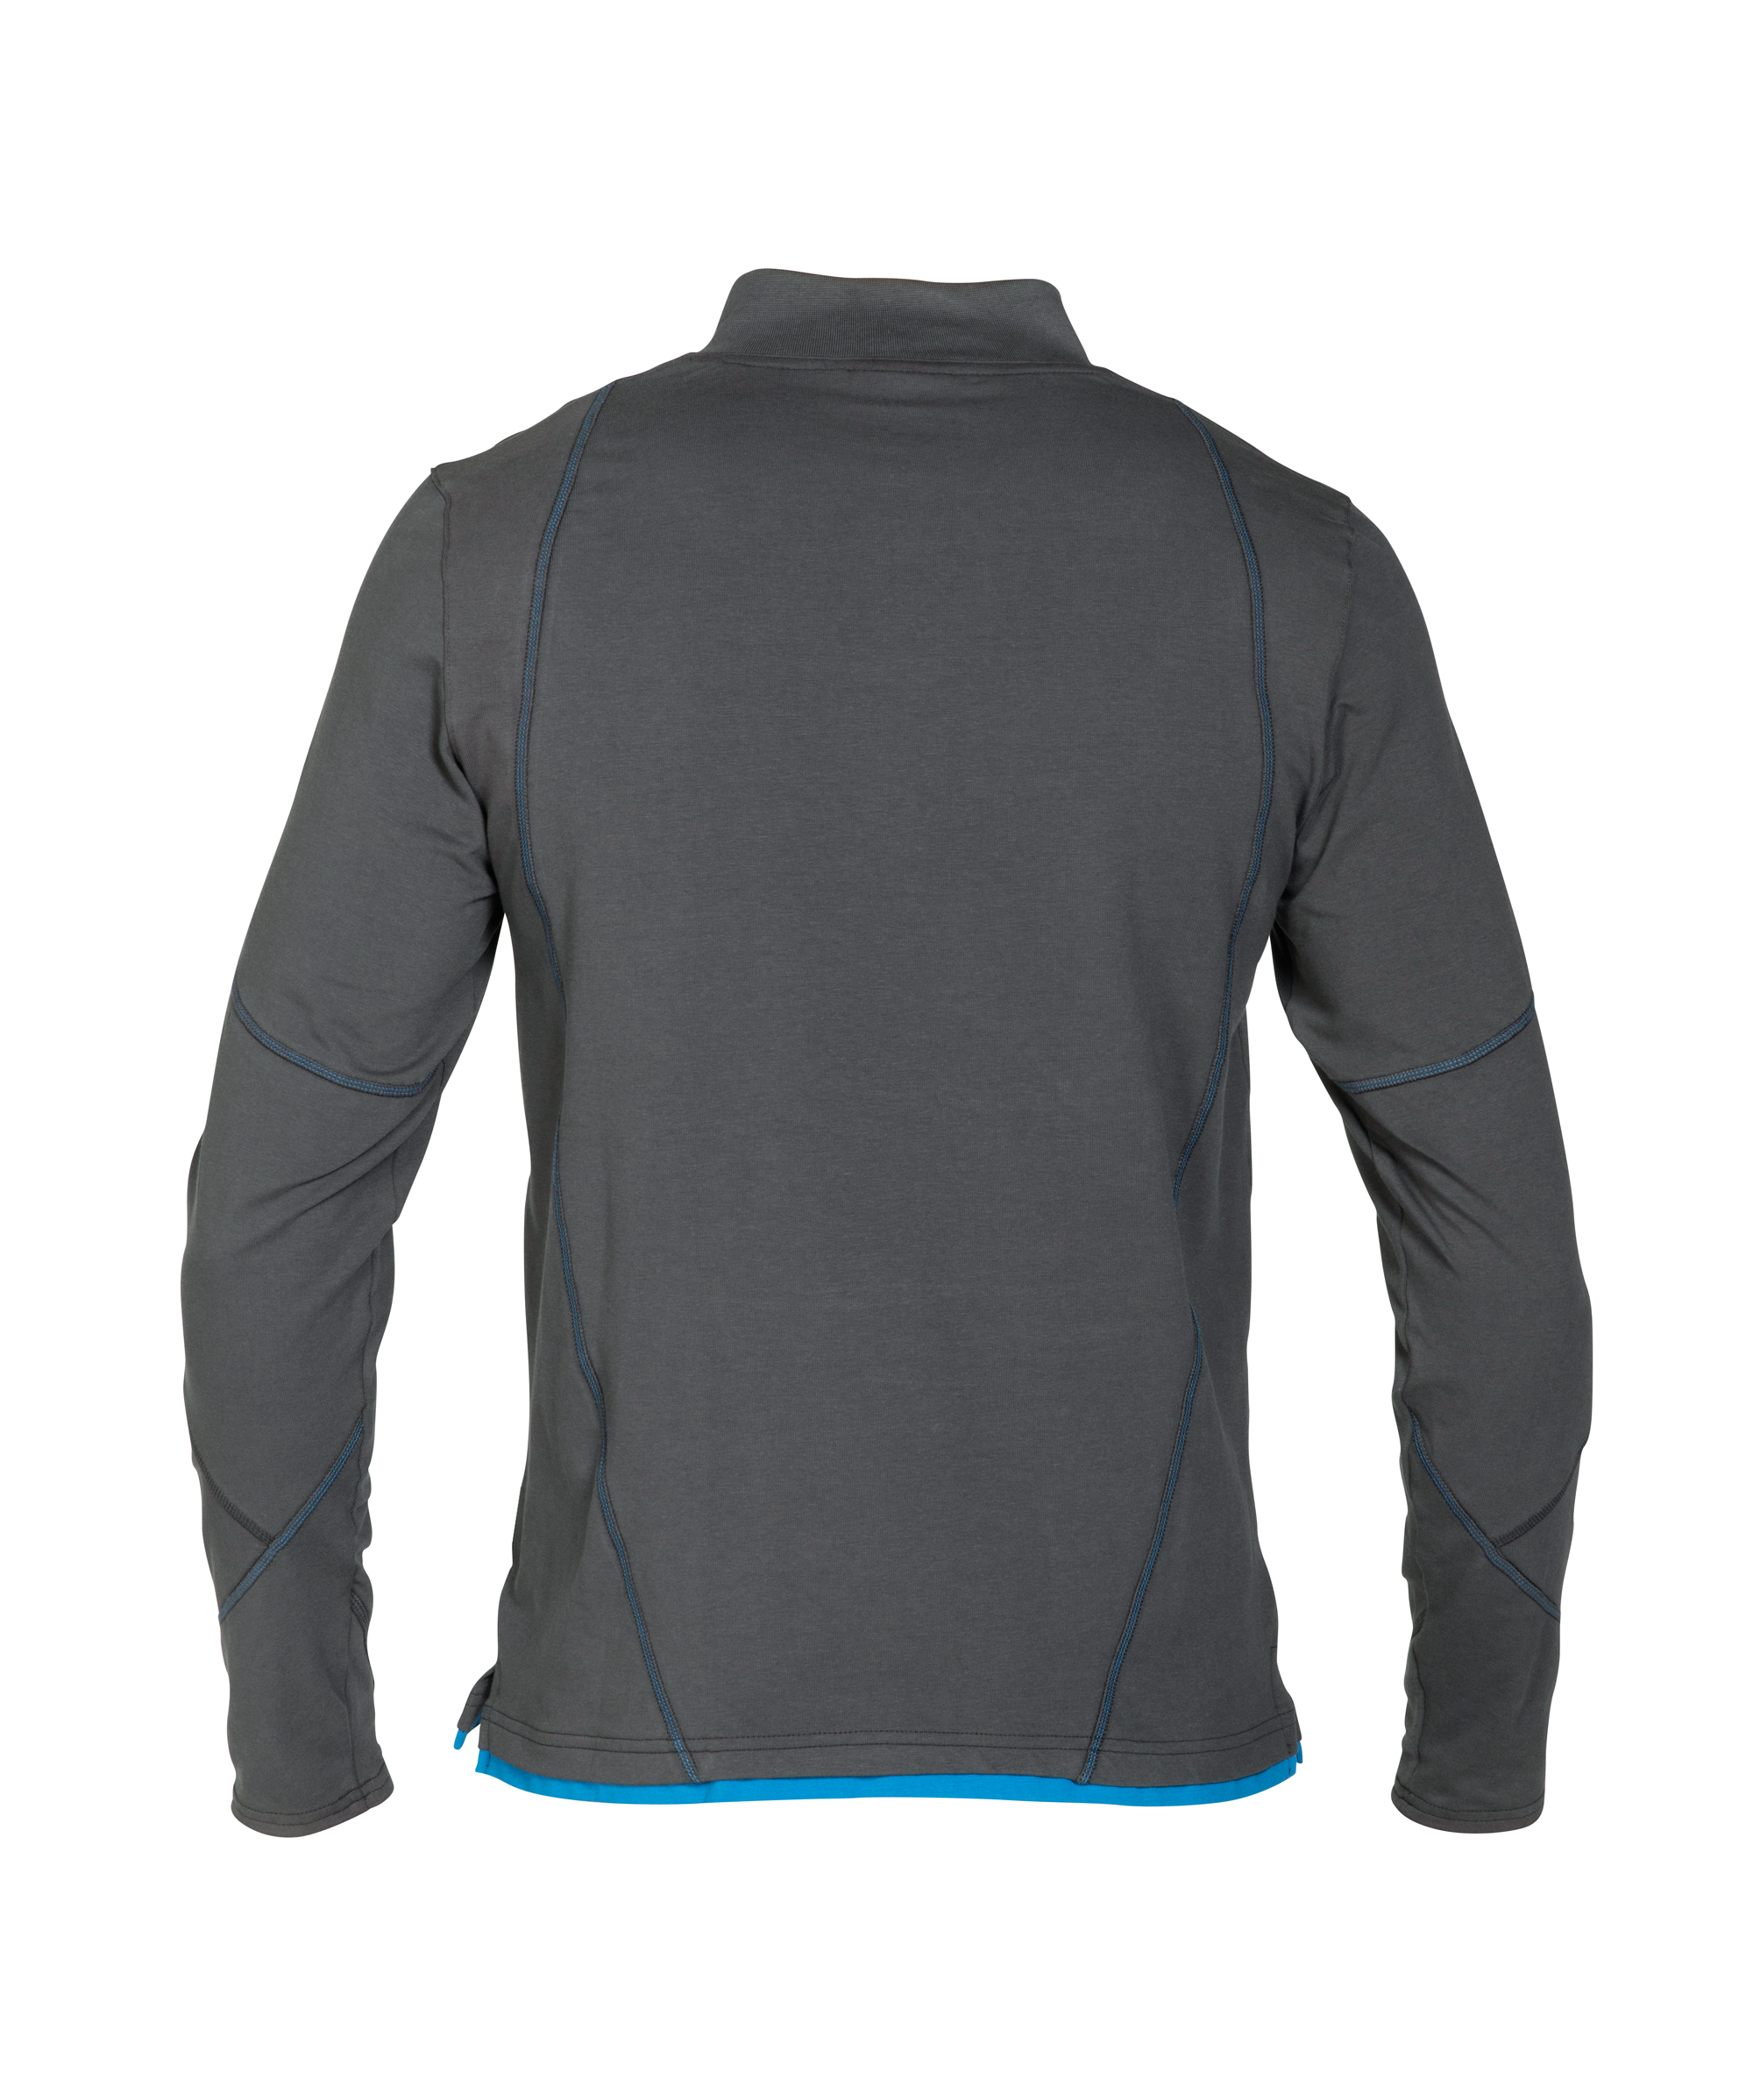 sonic_t-shirt-with-long-sleeves_anthracite-grey-azure-blue_back.jpg